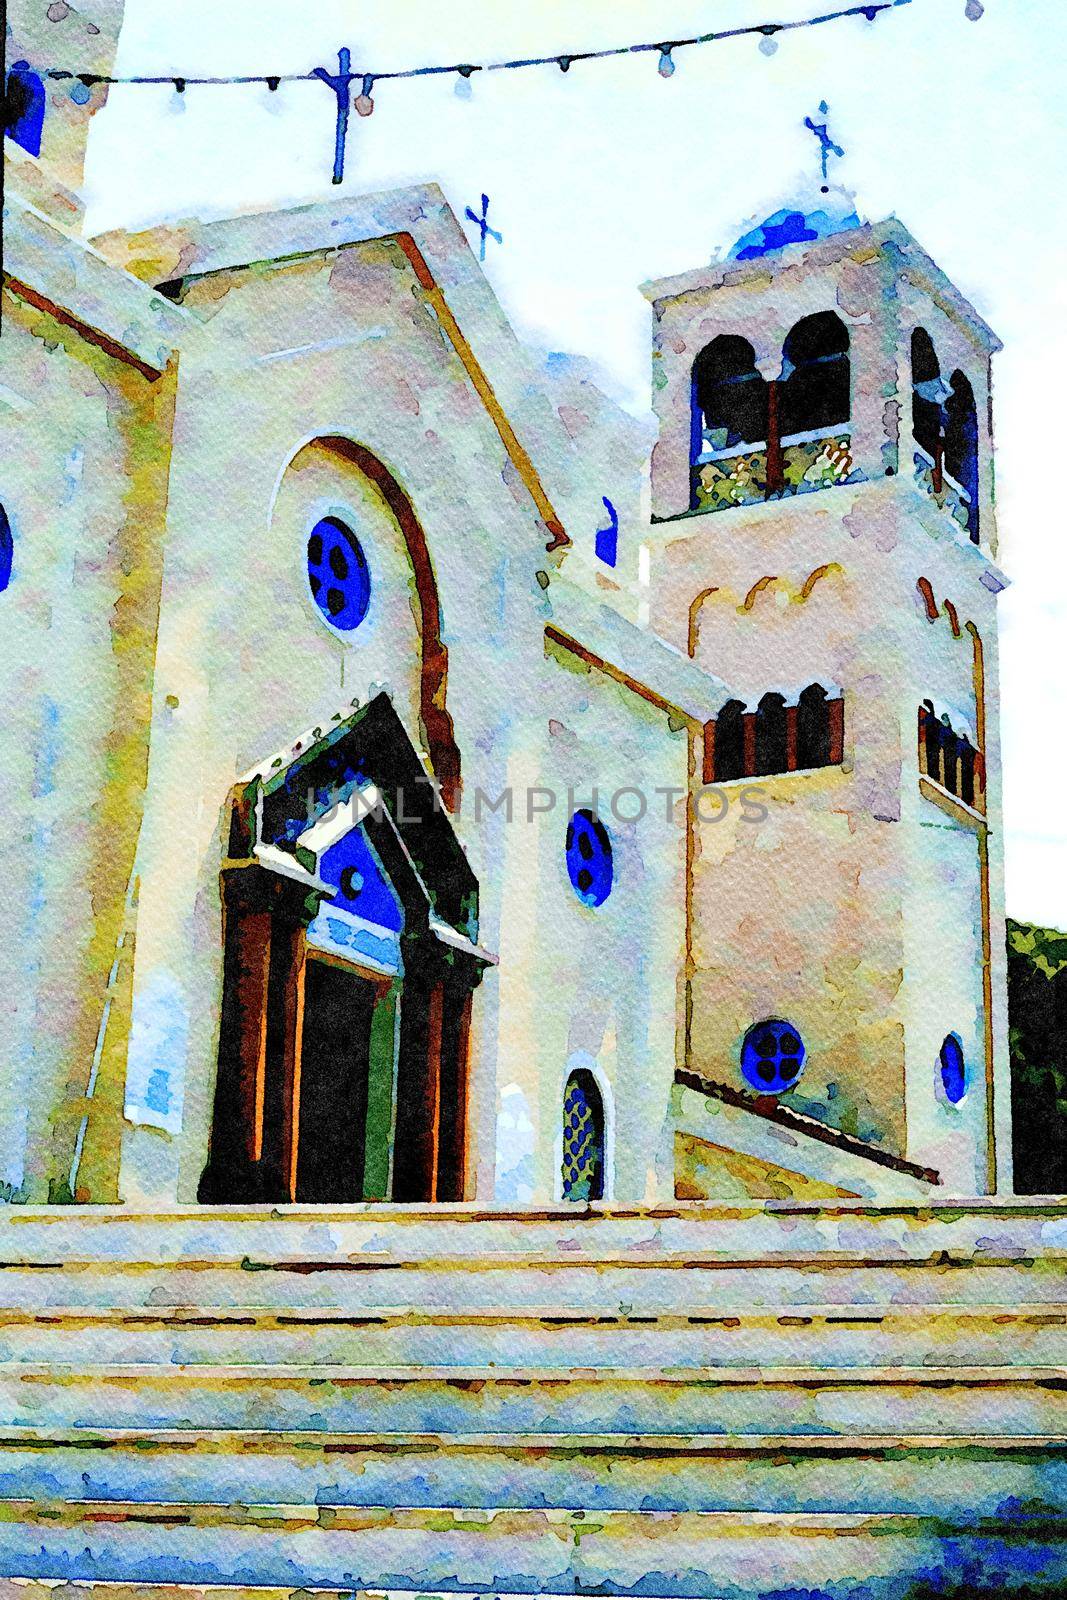 Watercolorstyle picture representing the main facade of an Orthodox church in the town on one of the Greek islands